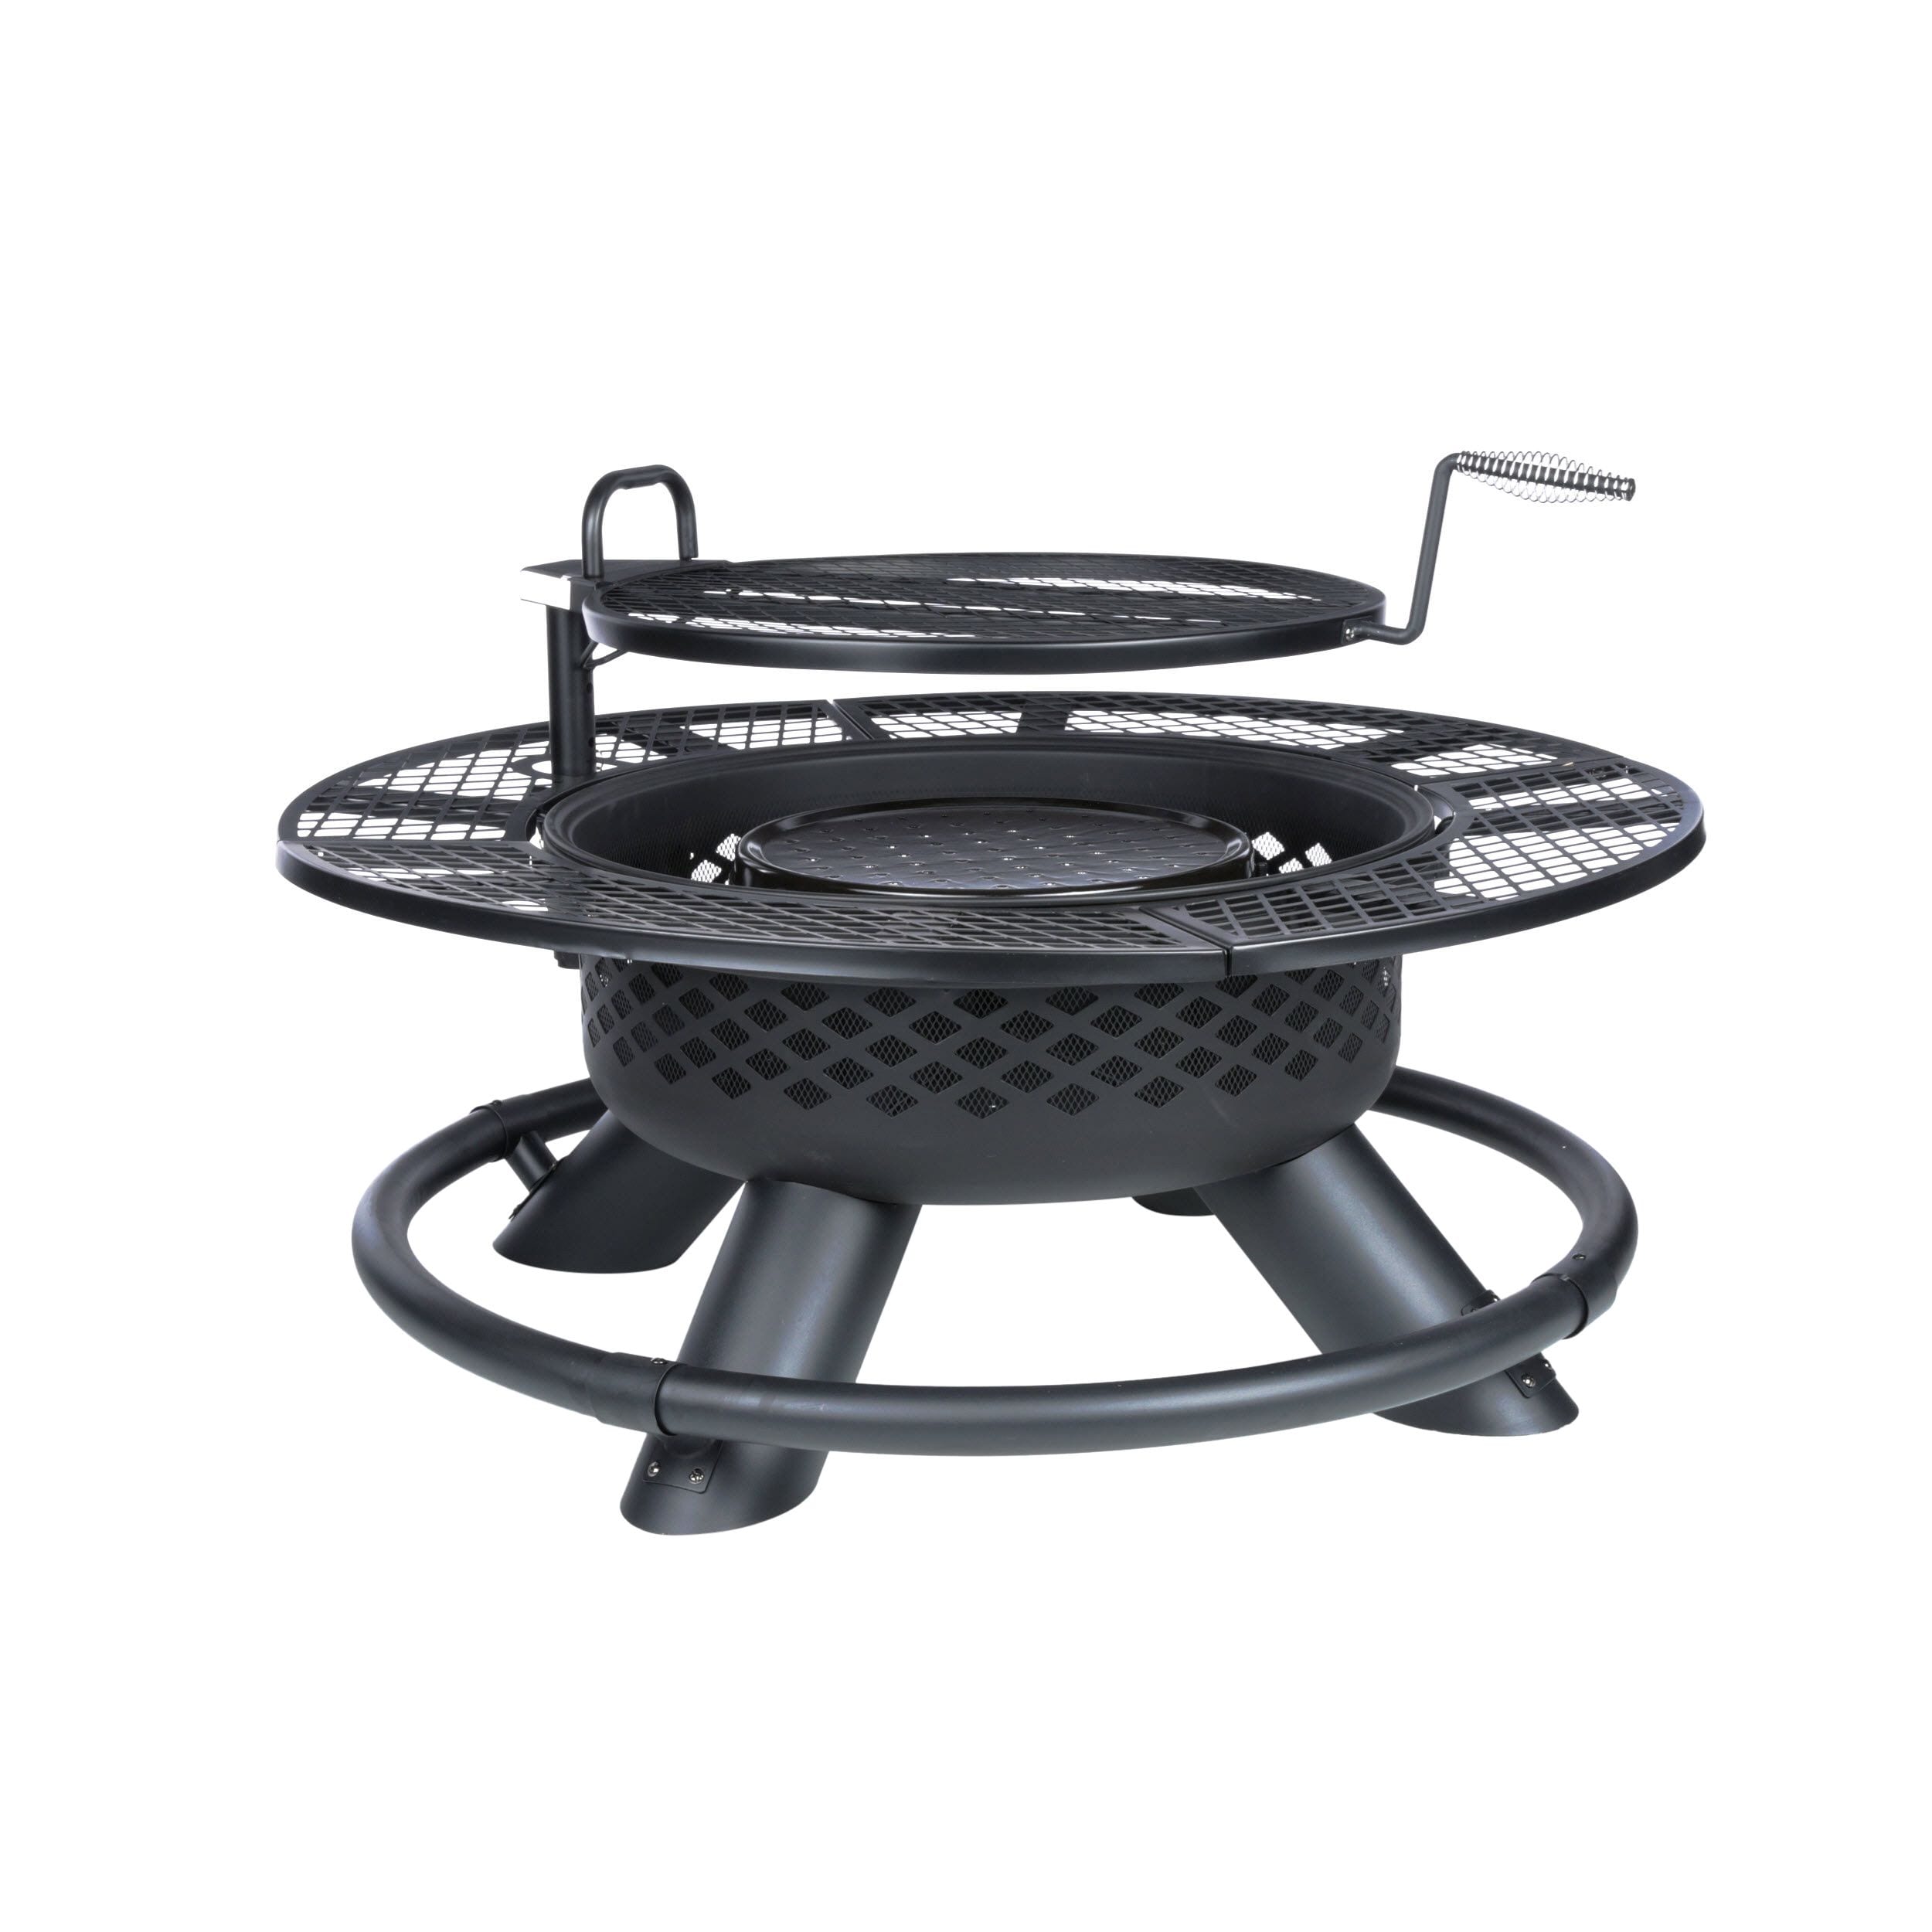 Grill Grate Round Stainless Steel for Pan Grill-Fire Shells 3 Leg BBQ Grill 